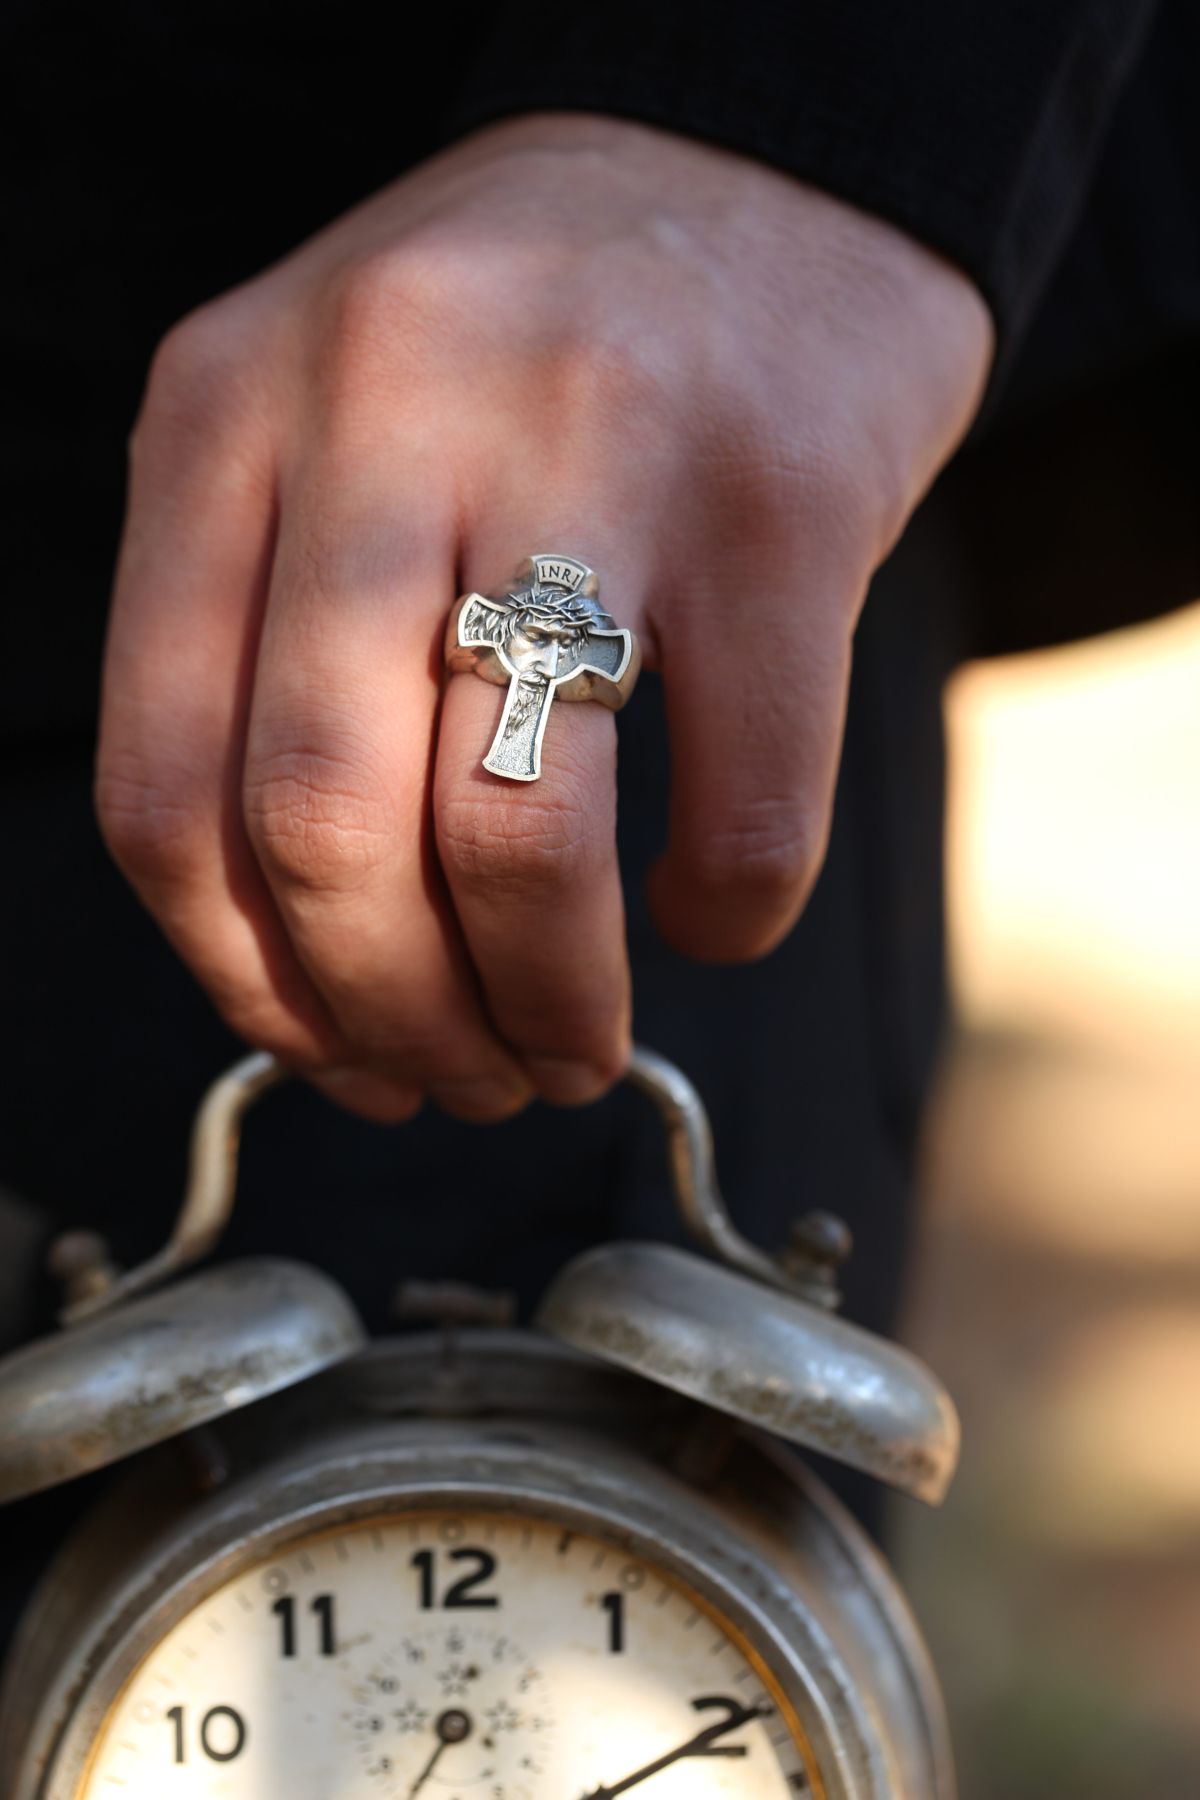 trend of the rings, jesus cross ring design today.